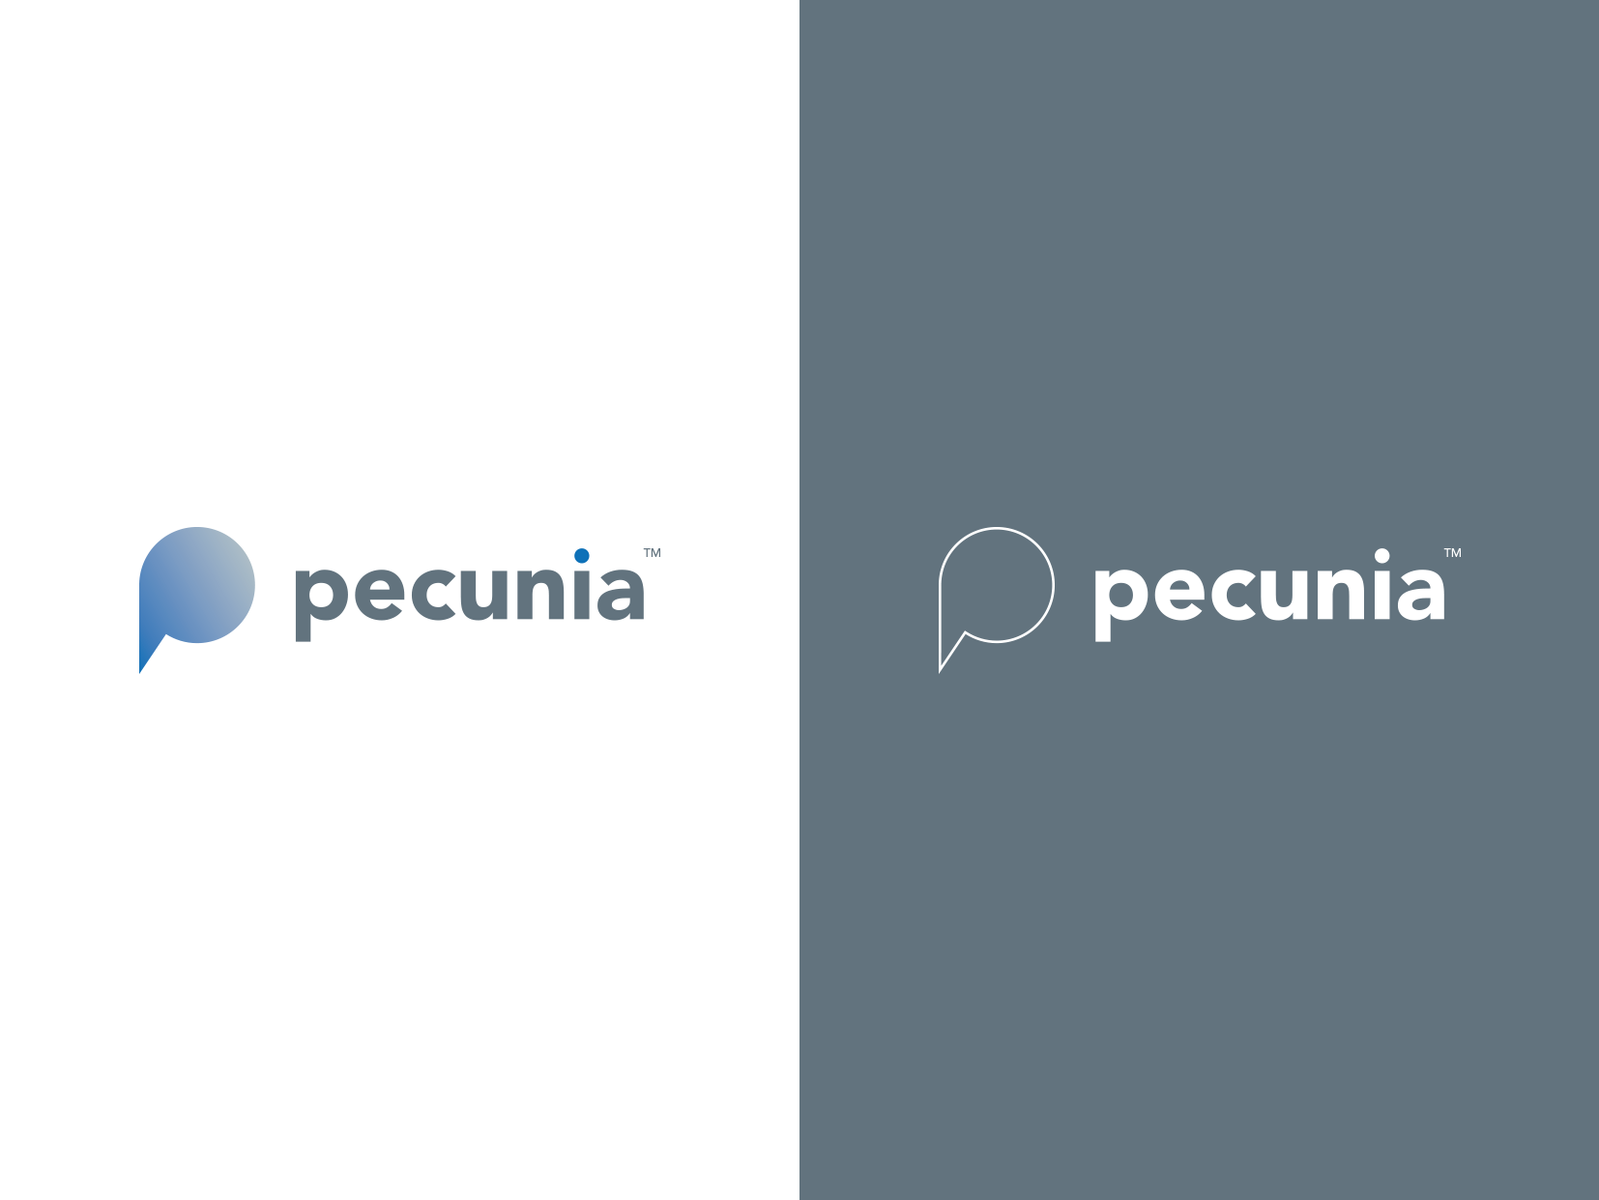 Pecunia logo by kreativlab on Dribbble